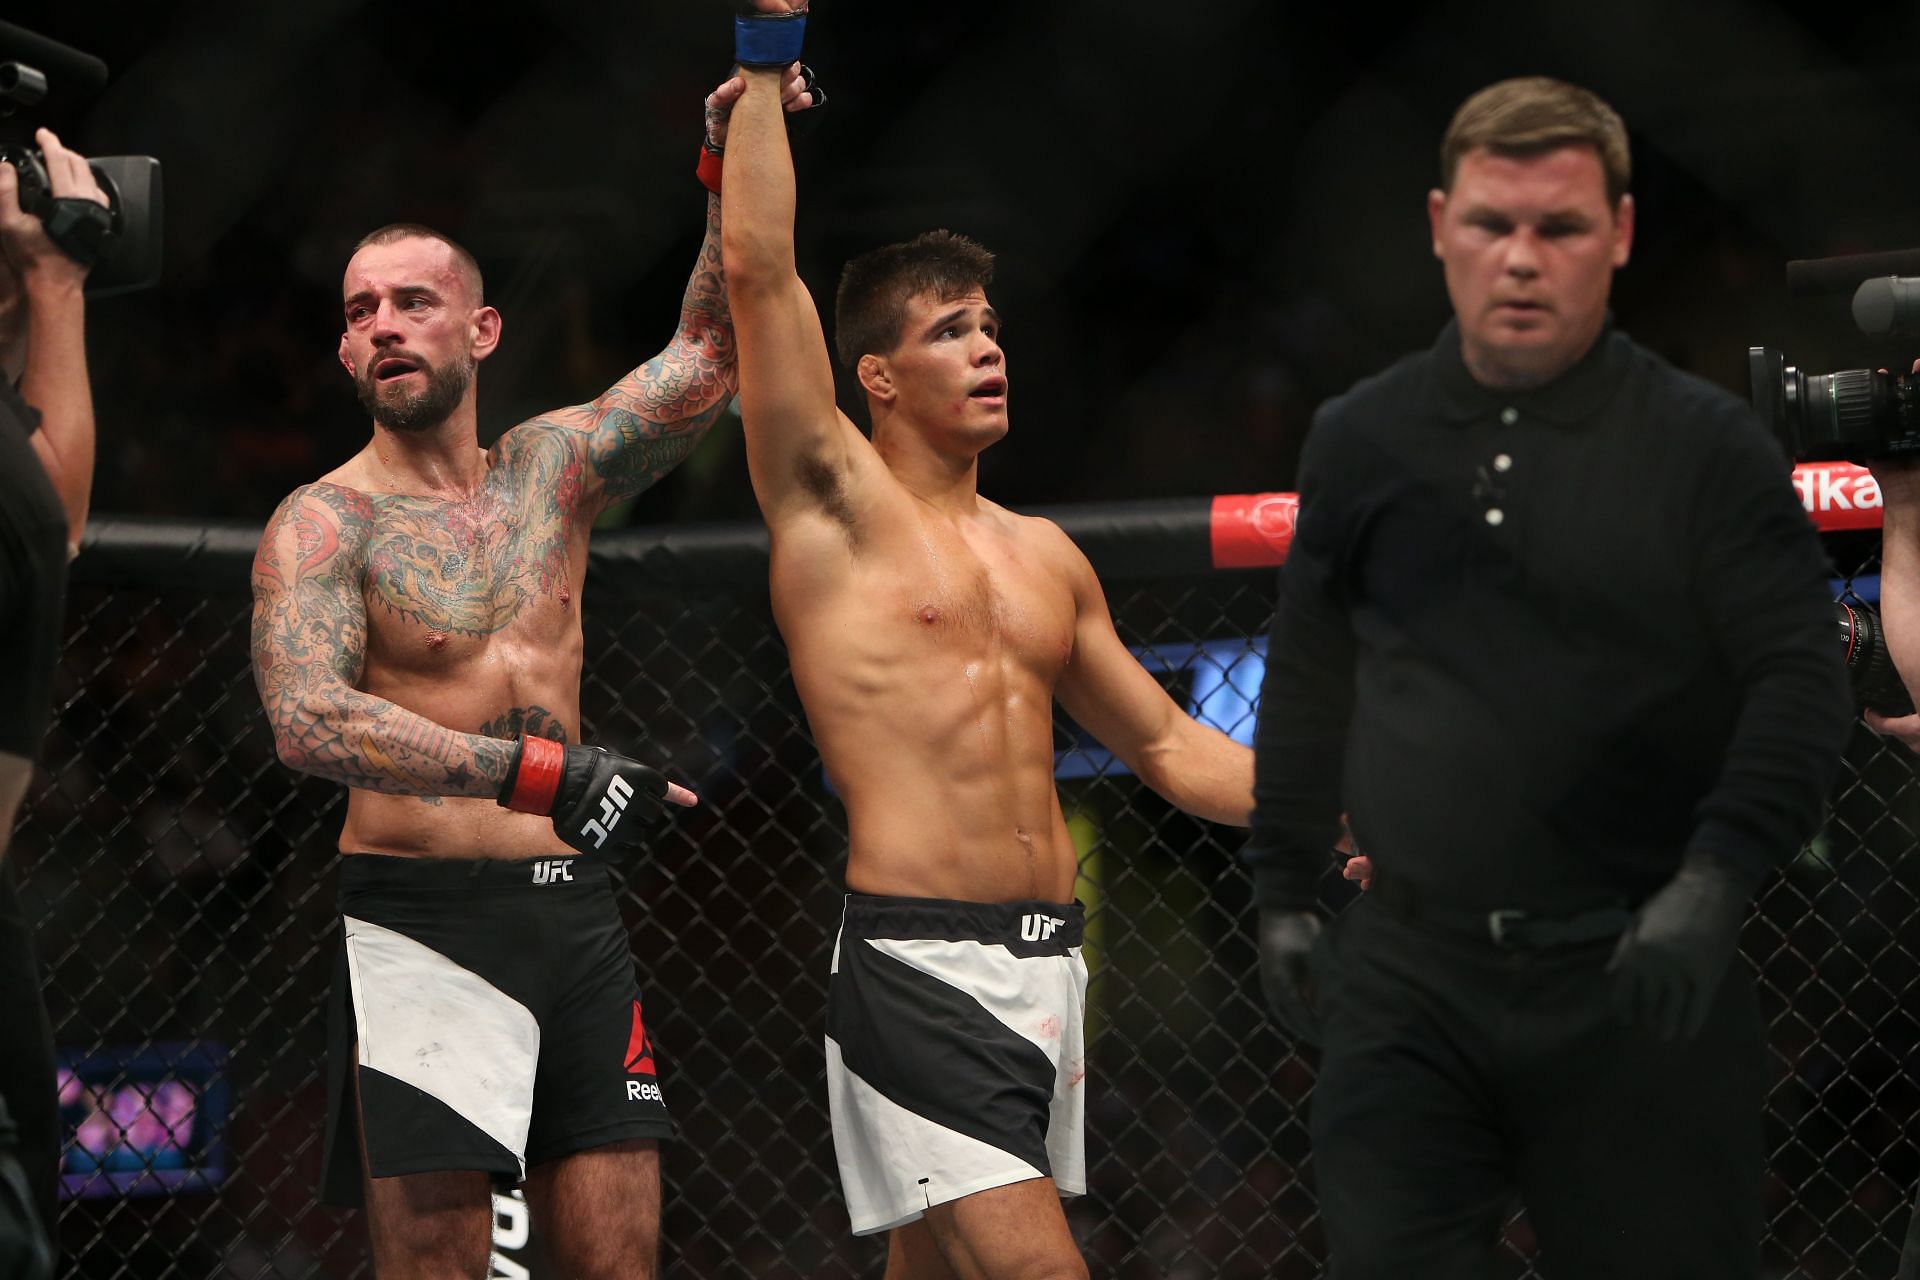 CM Punk was well beaten by Mickey Gall in his first octagon appearance